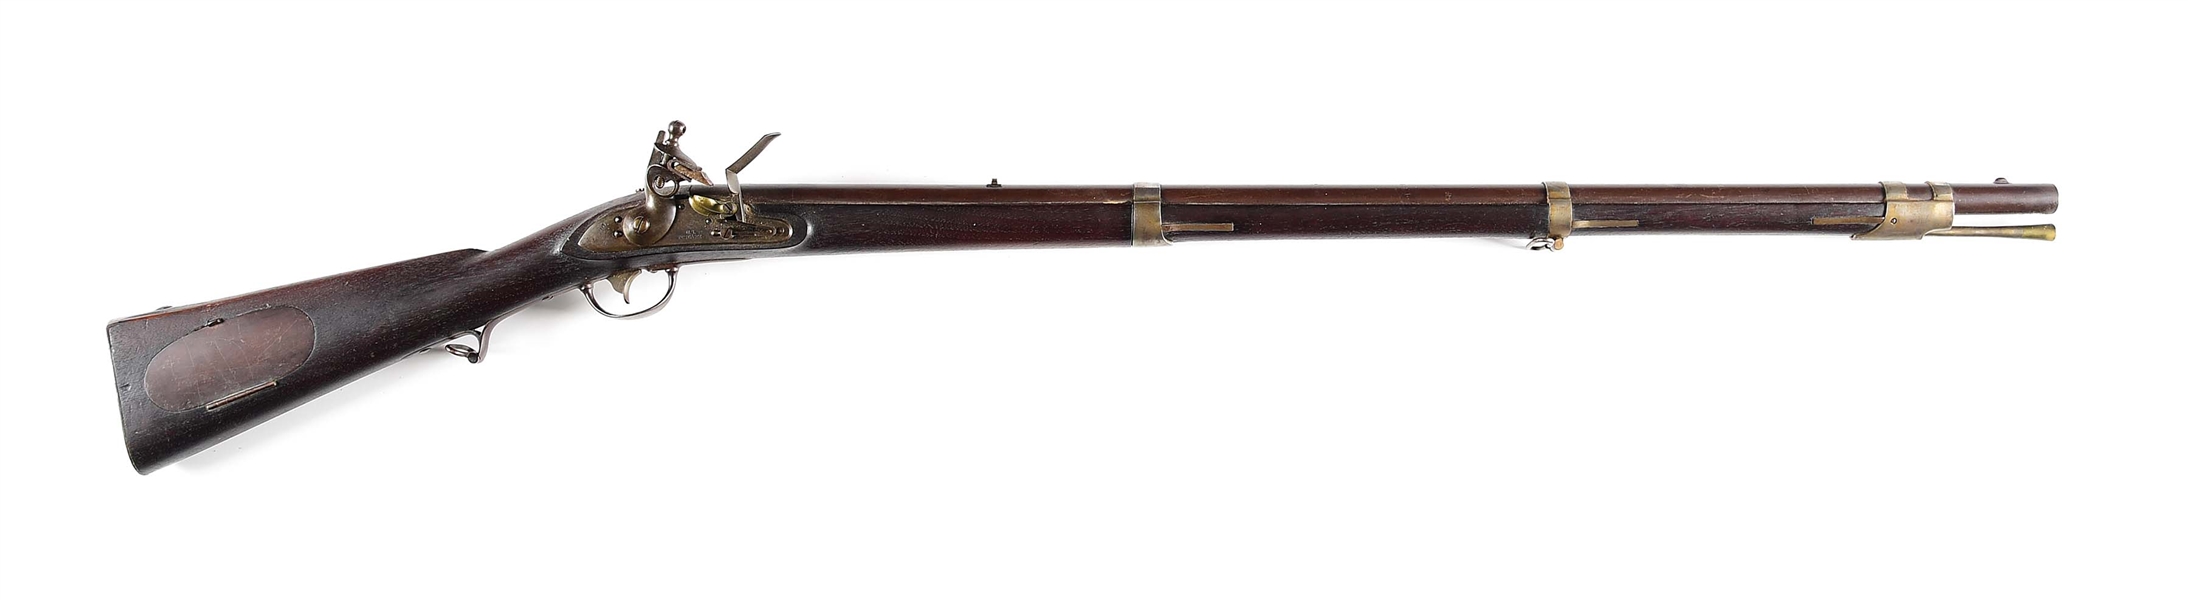 (A) EXCEPTIONAL HIGH CONDITION US M1817 "COMMON RIFLE" CONTRACT FLINTLOCK RIFLE BY STARR DATED 1824 IN ORIGINAL FLINT.